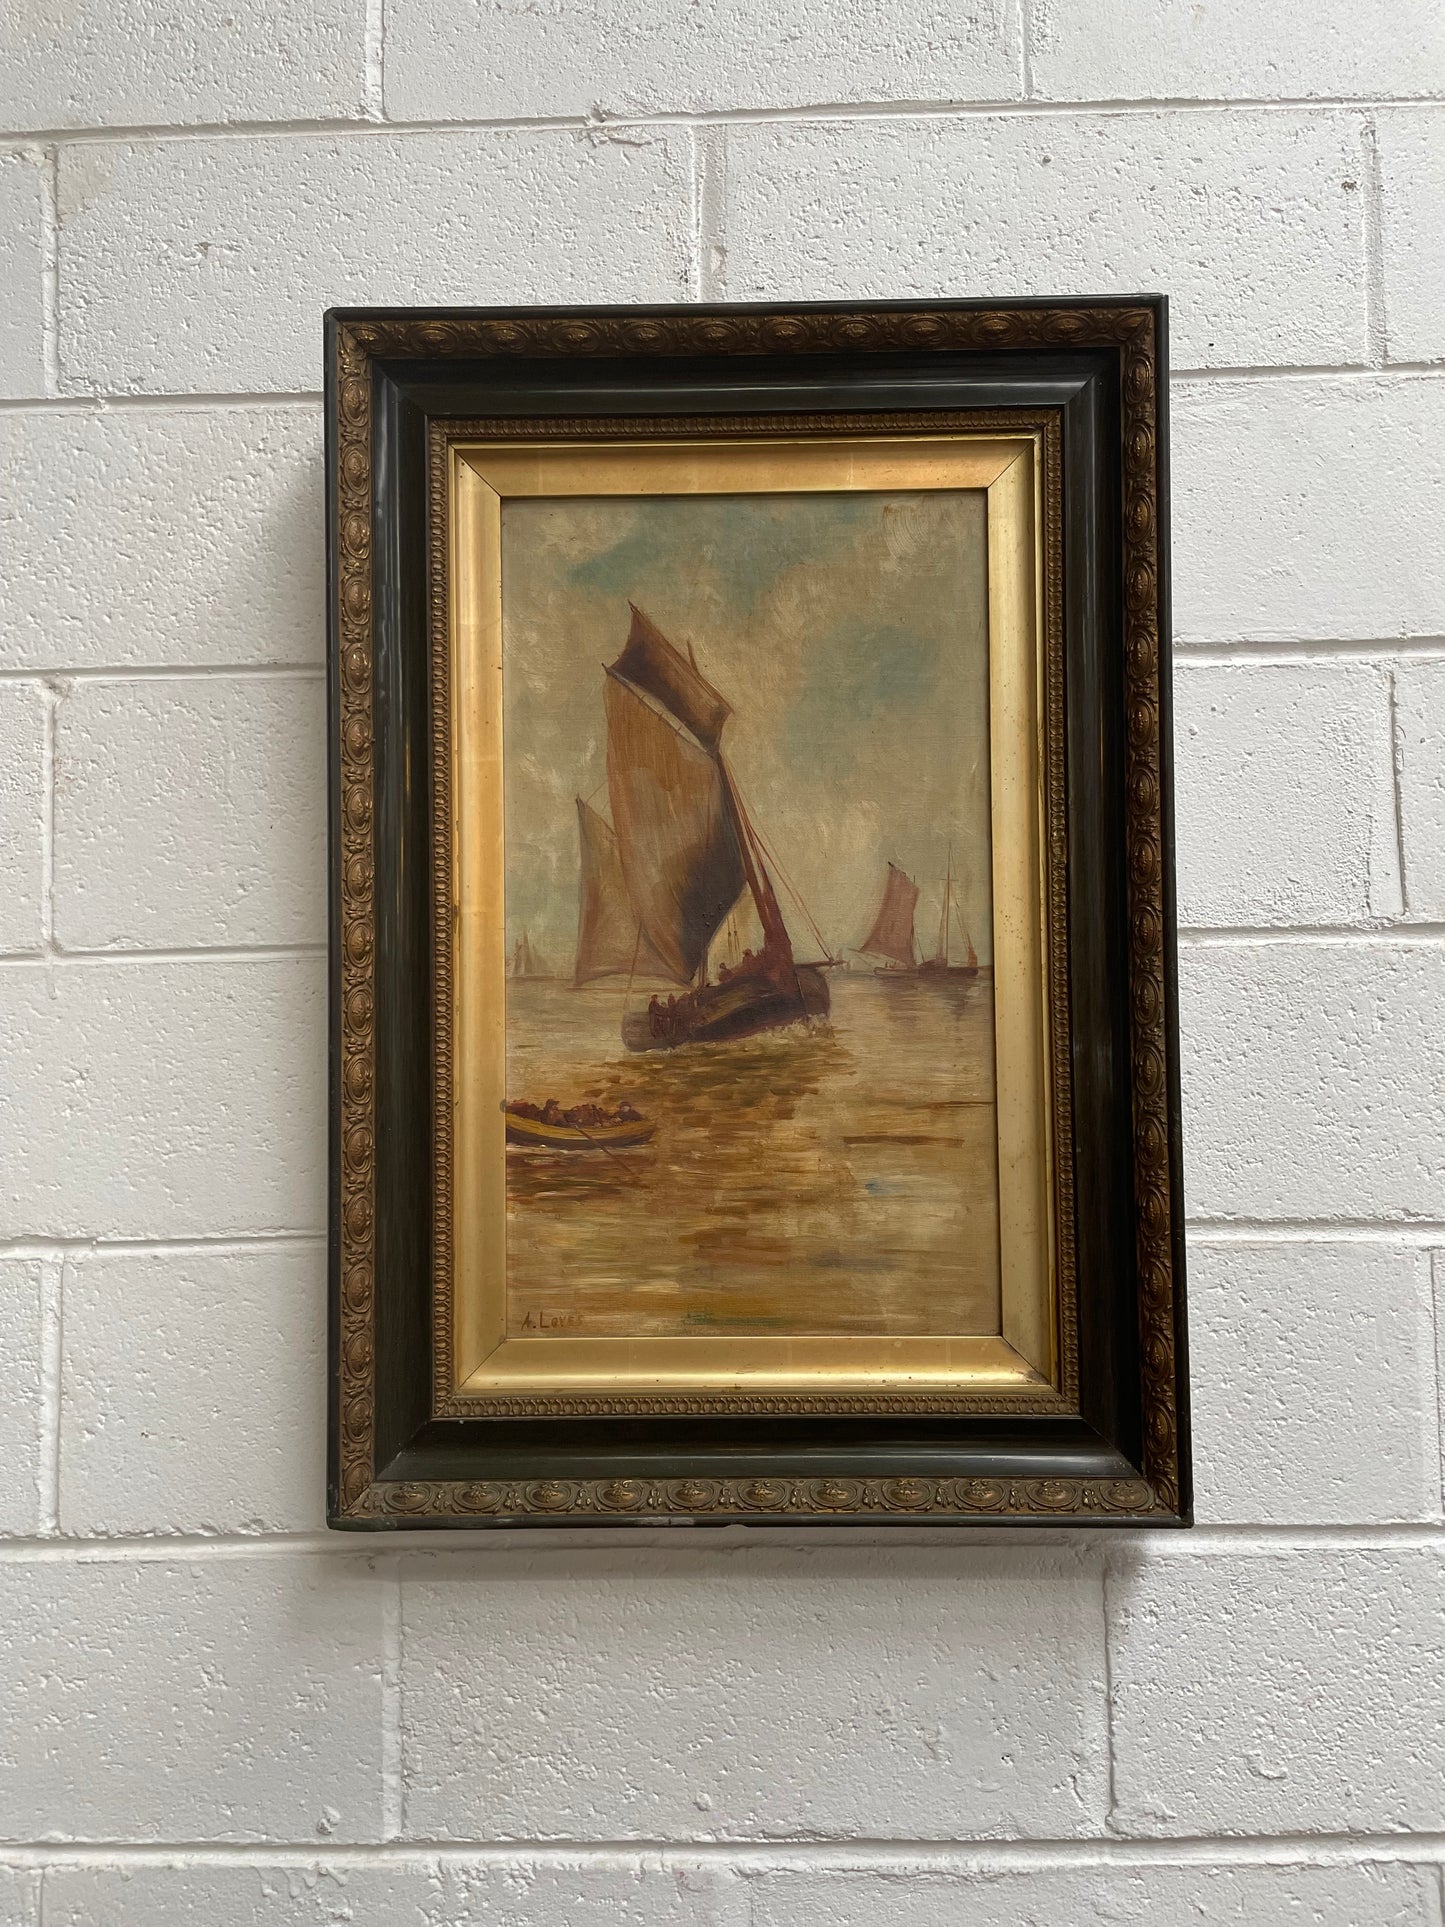 Lovely Antique "Marine Scene" oil on canvas framed in a pretty ornate frame. Please see all photos as they help form part of the description and condition.